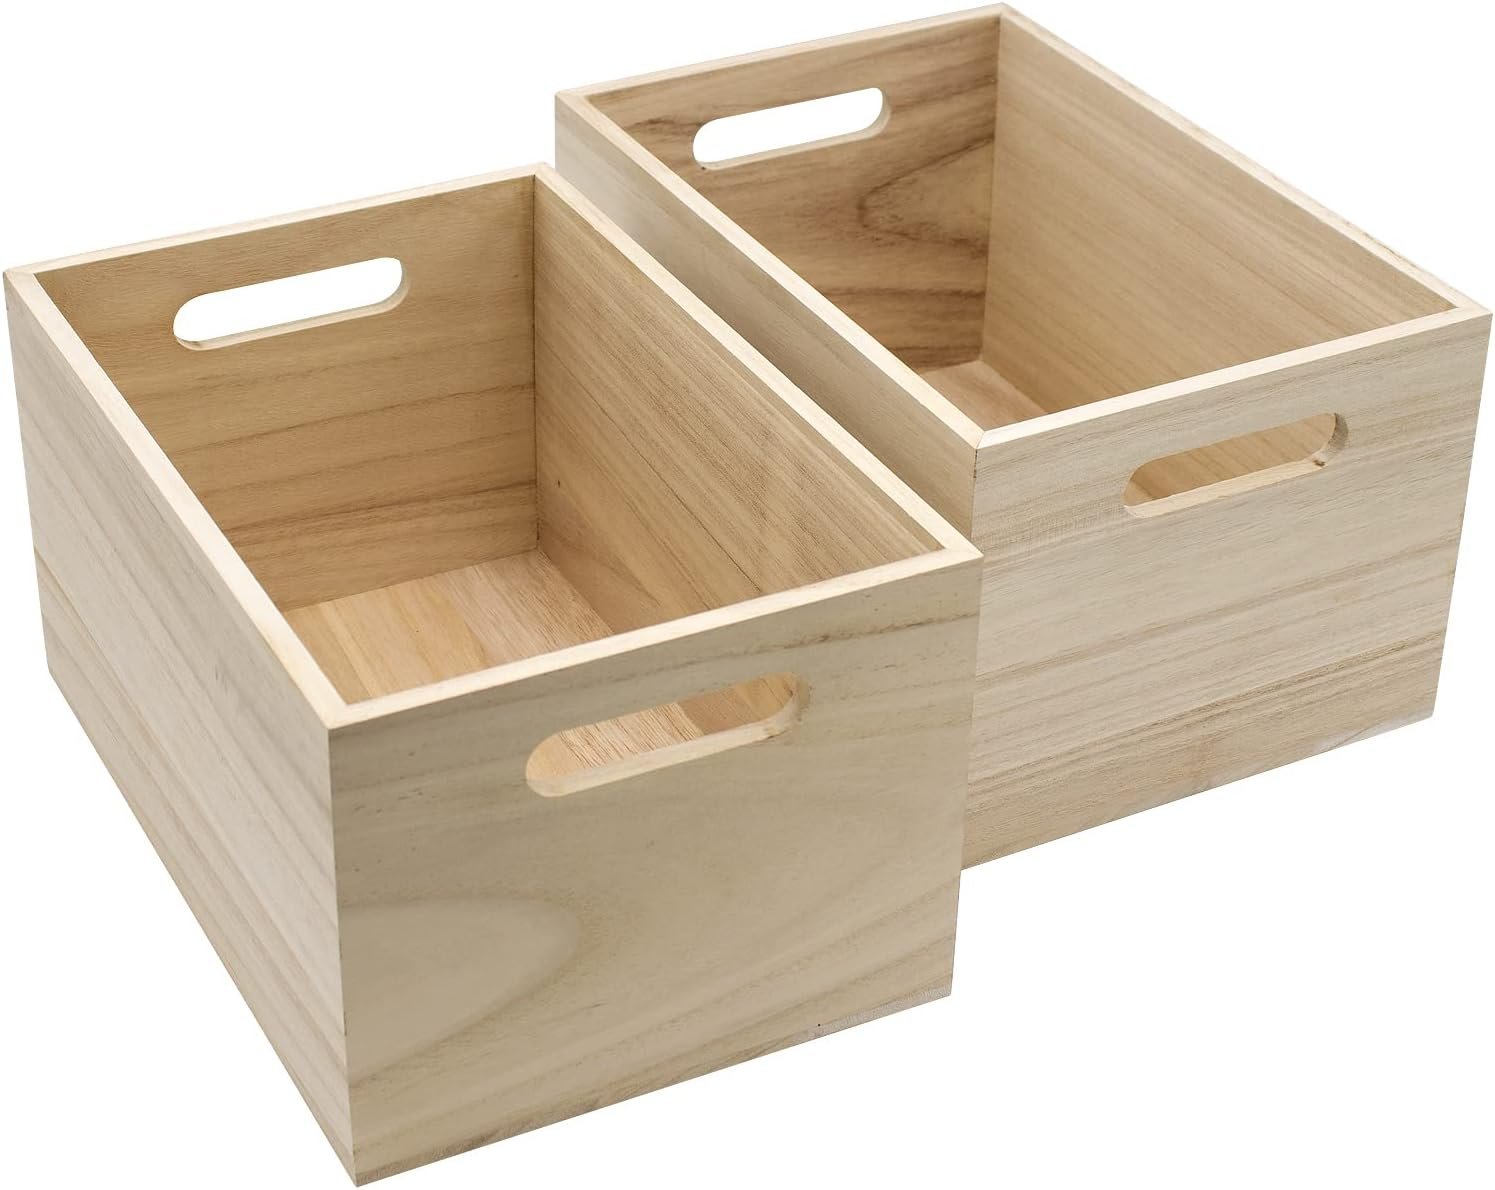 Sorbus Unfinished Wood Crates – Organizer Bins review